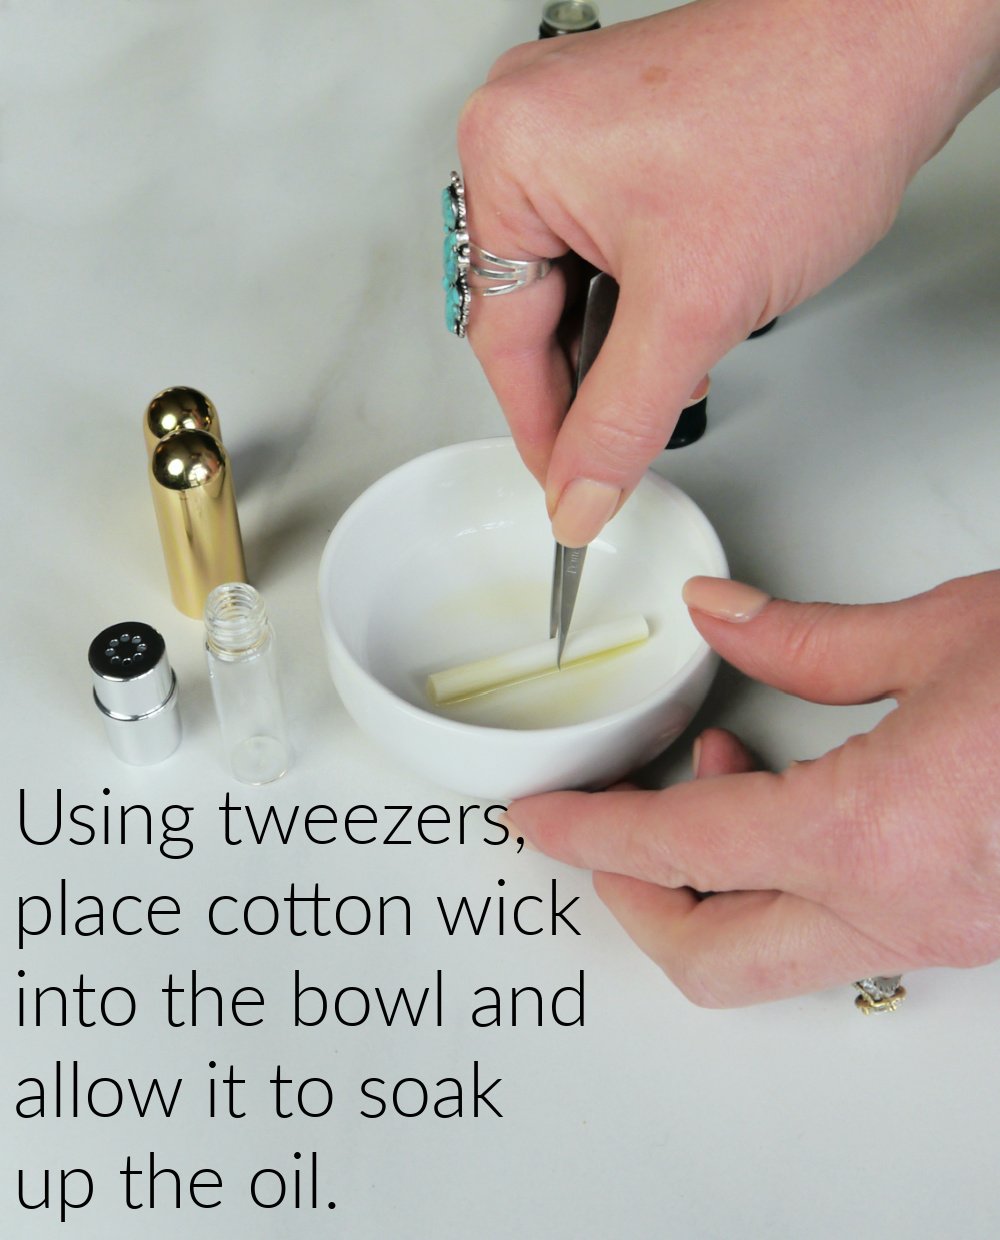 Hands placing cotton wick in white bowl with tweezers.